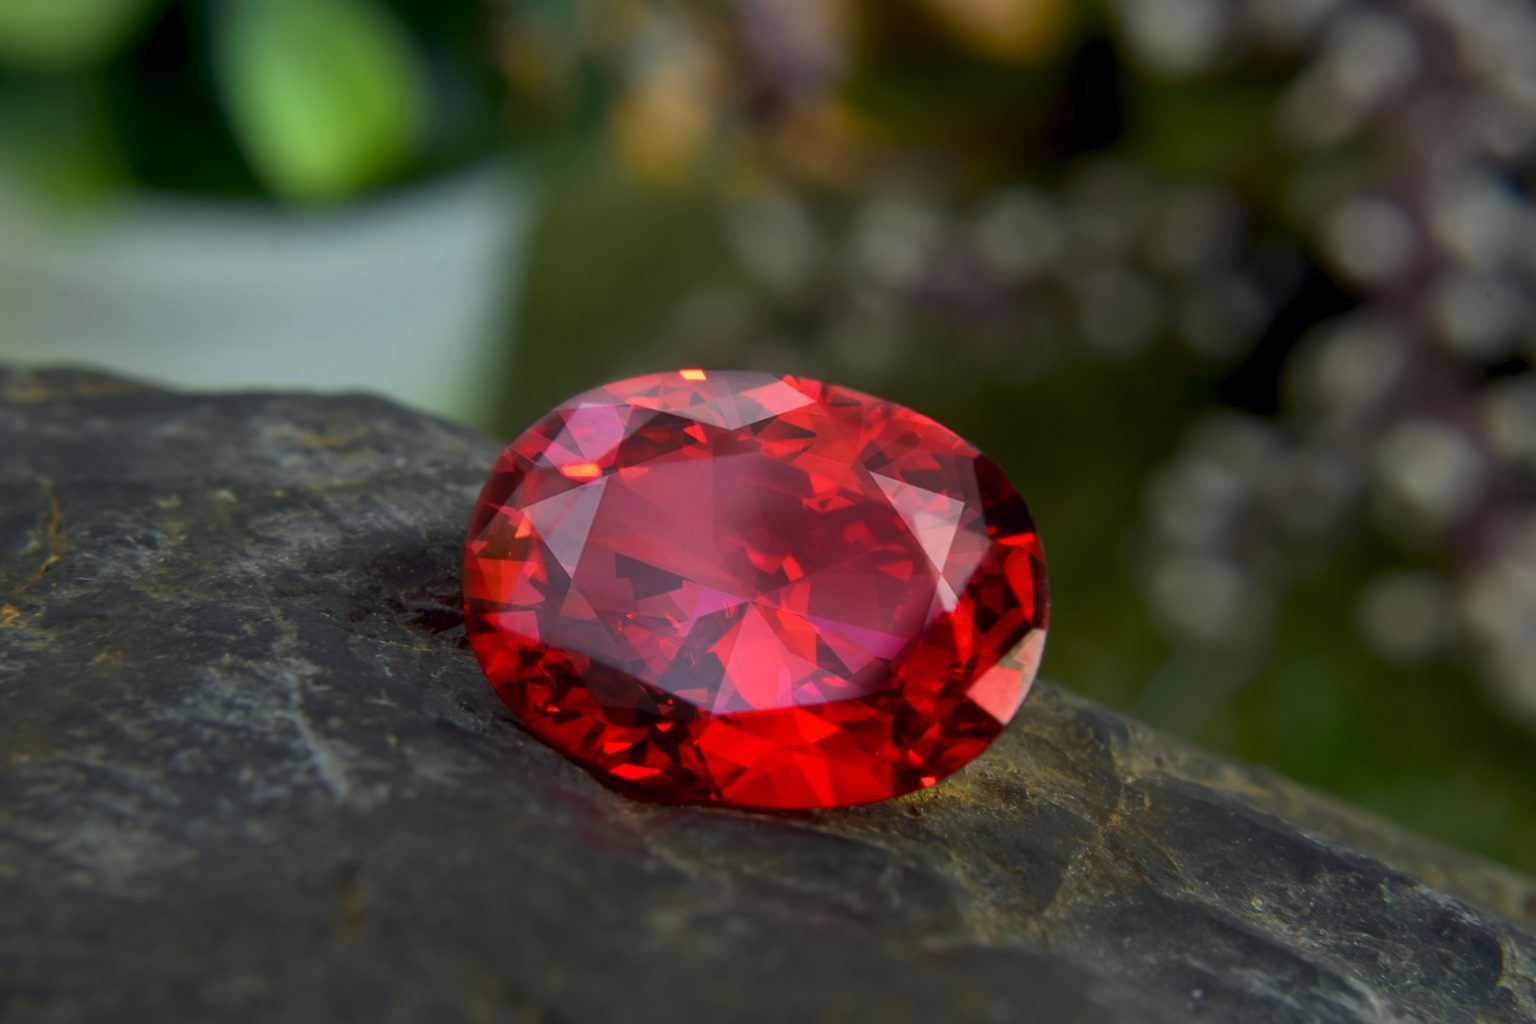 List of Red Gemstones: Names, Meanings and Pictures of Red Gems